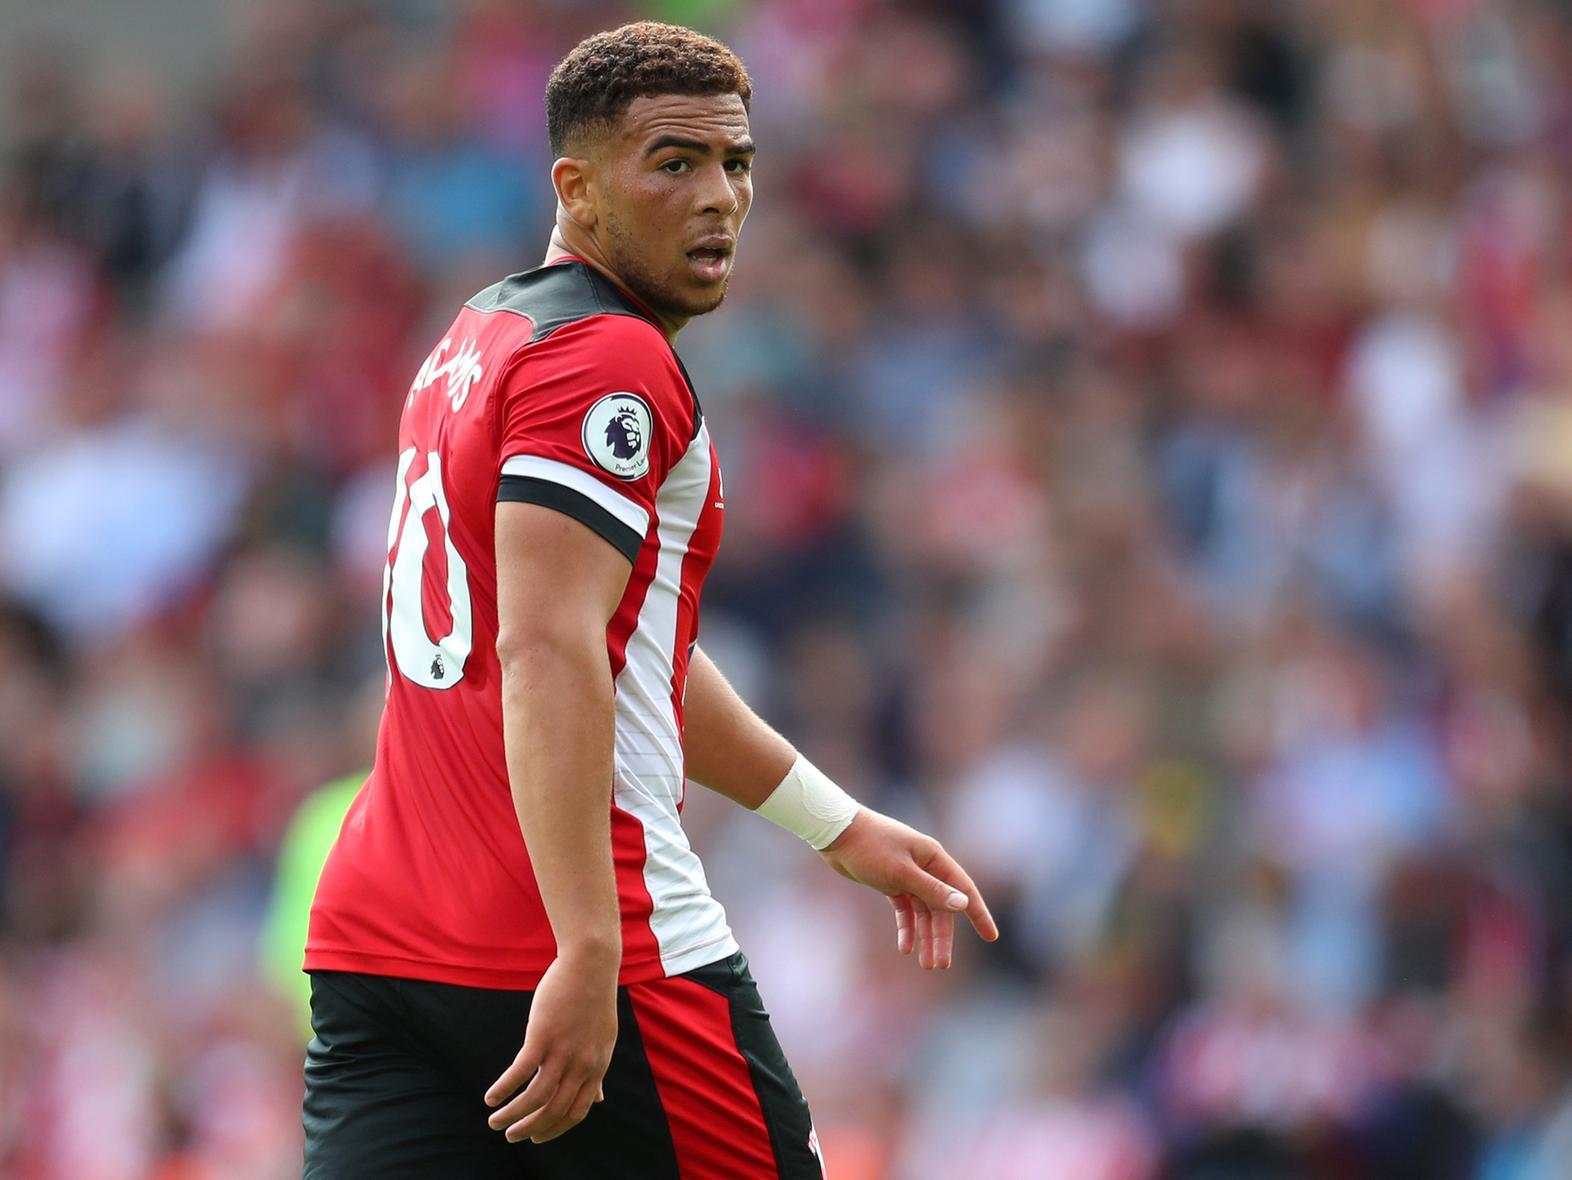 Leeds United's primary striker target Che Adams is said to be keen on a move to Elland Road in January, however, Southampton may block a potential loan move for their player. (The Athletic)